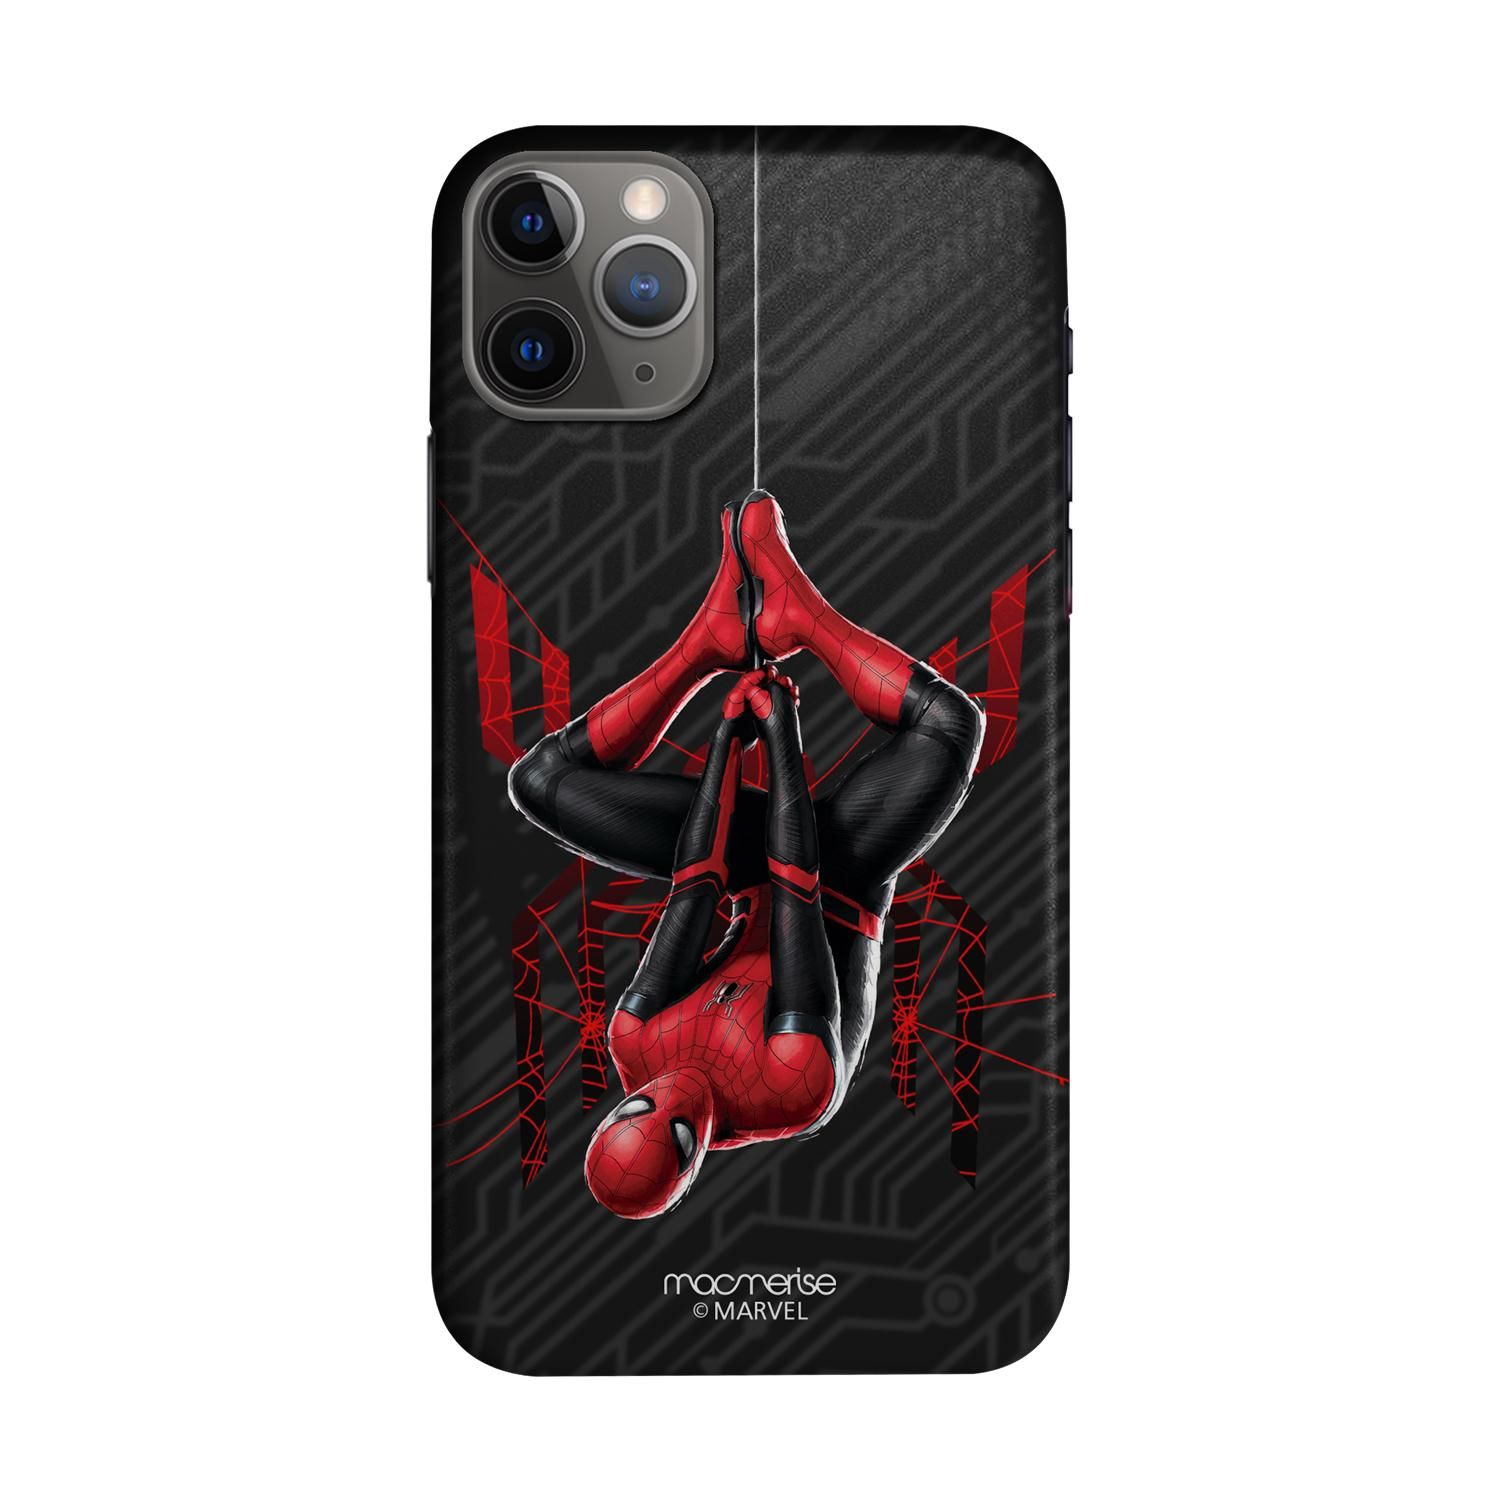 Buy Spiderman Tingle - Sleek Phone Case for iPhone 11 Pro Max Online